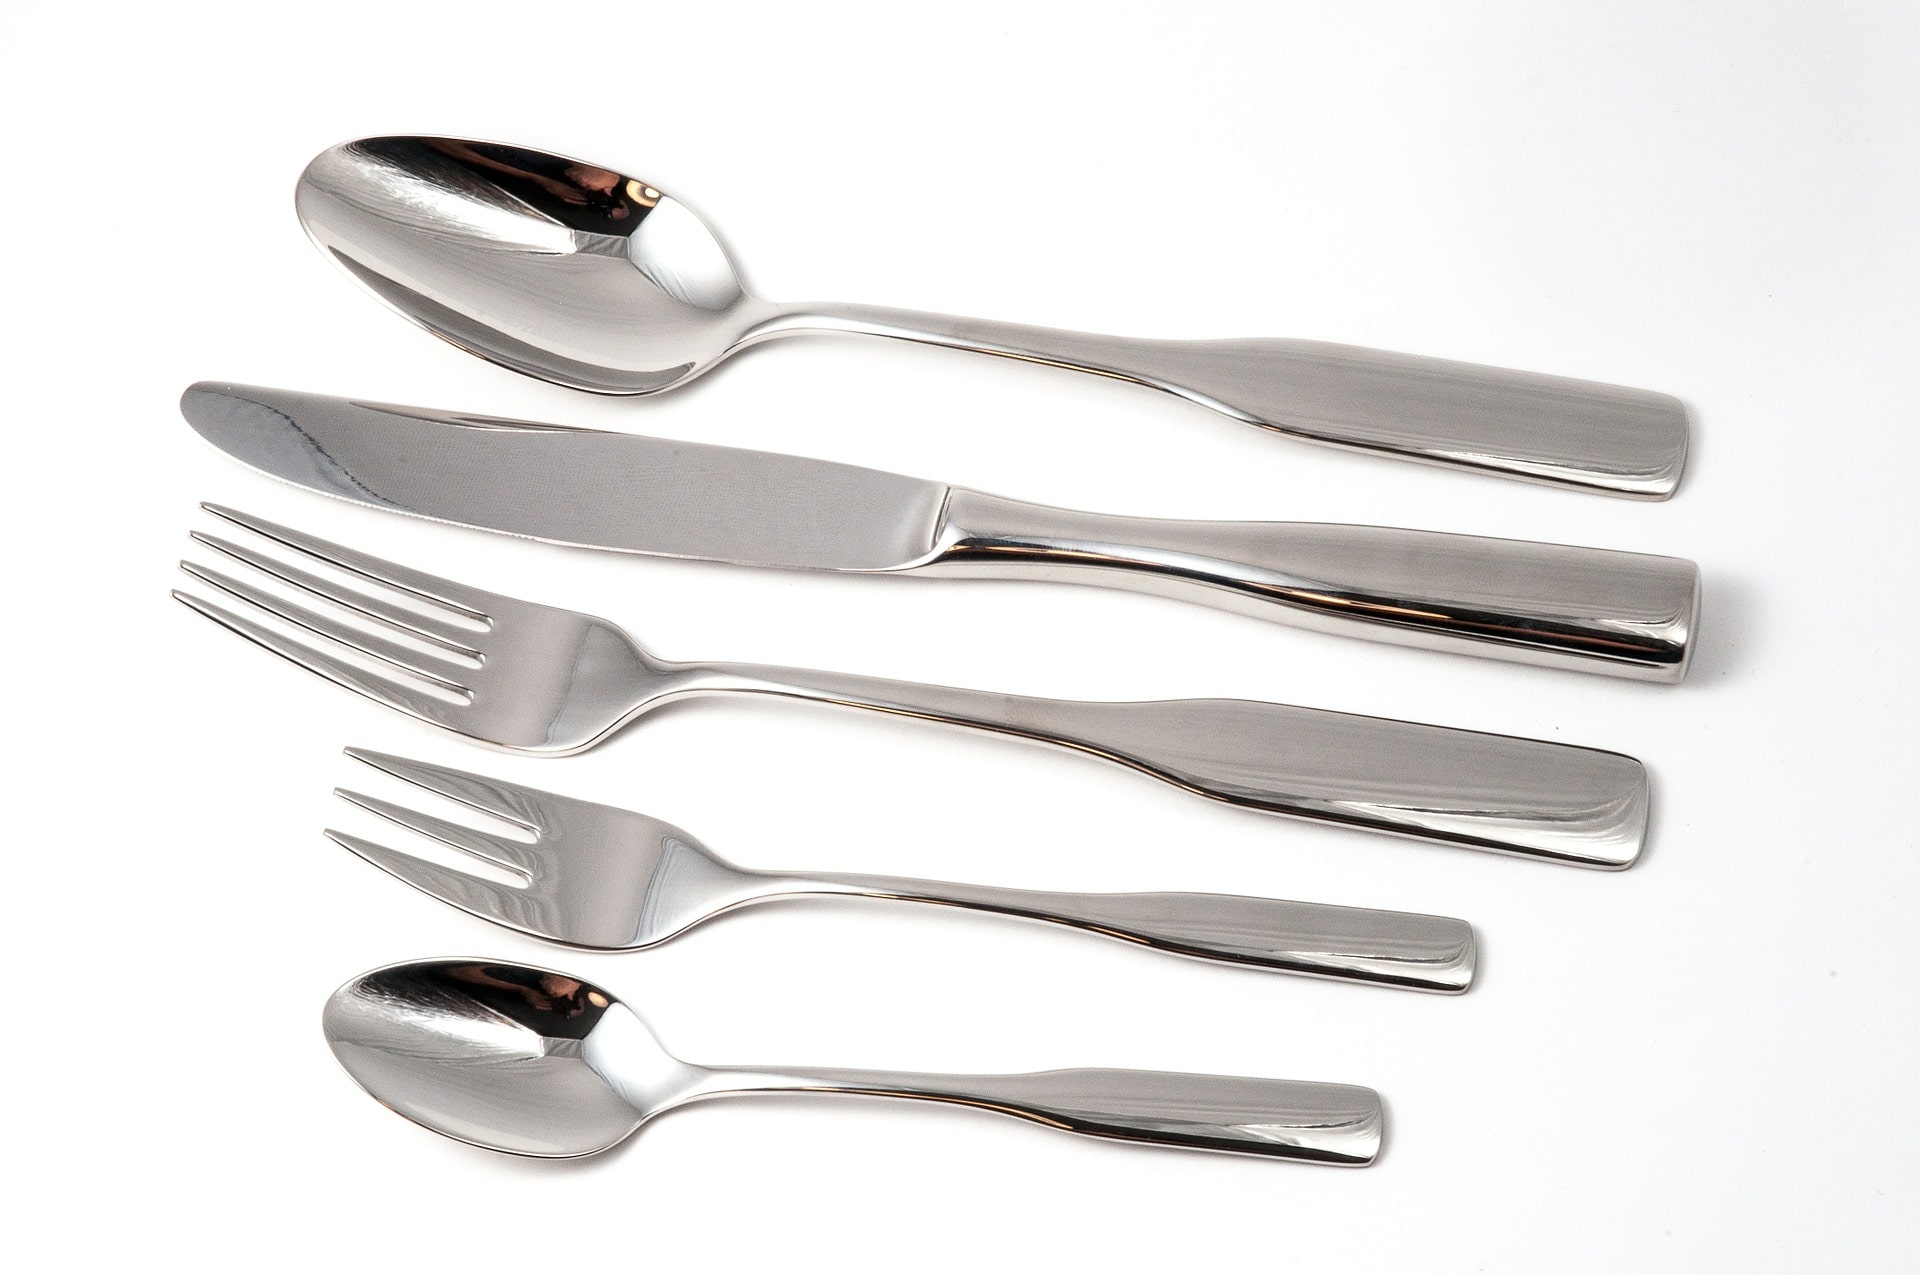 Types of Spoons and Knives Used For Food & Beverage (F&B) Service